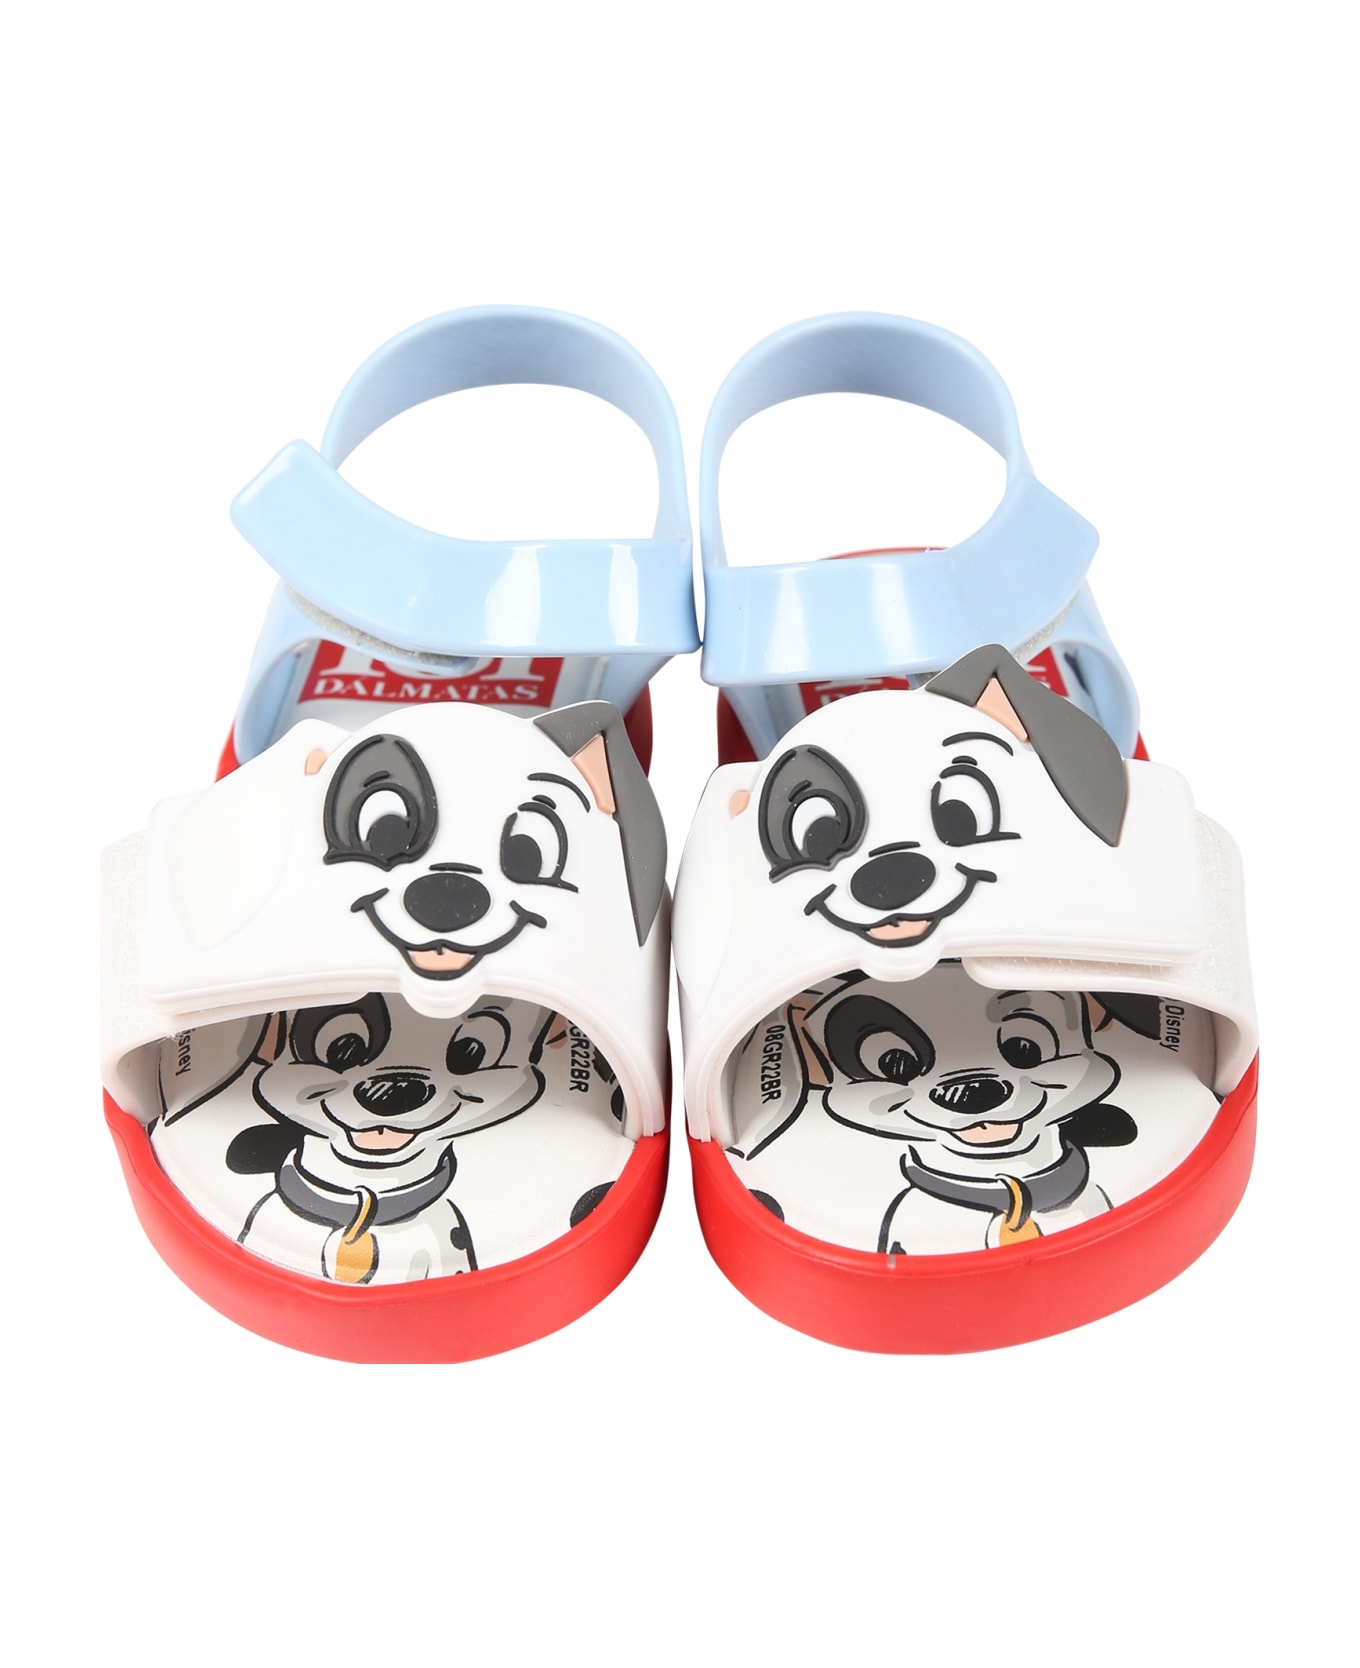 Melissa Red Sandals For Kids With 101 Dalmatians - Red